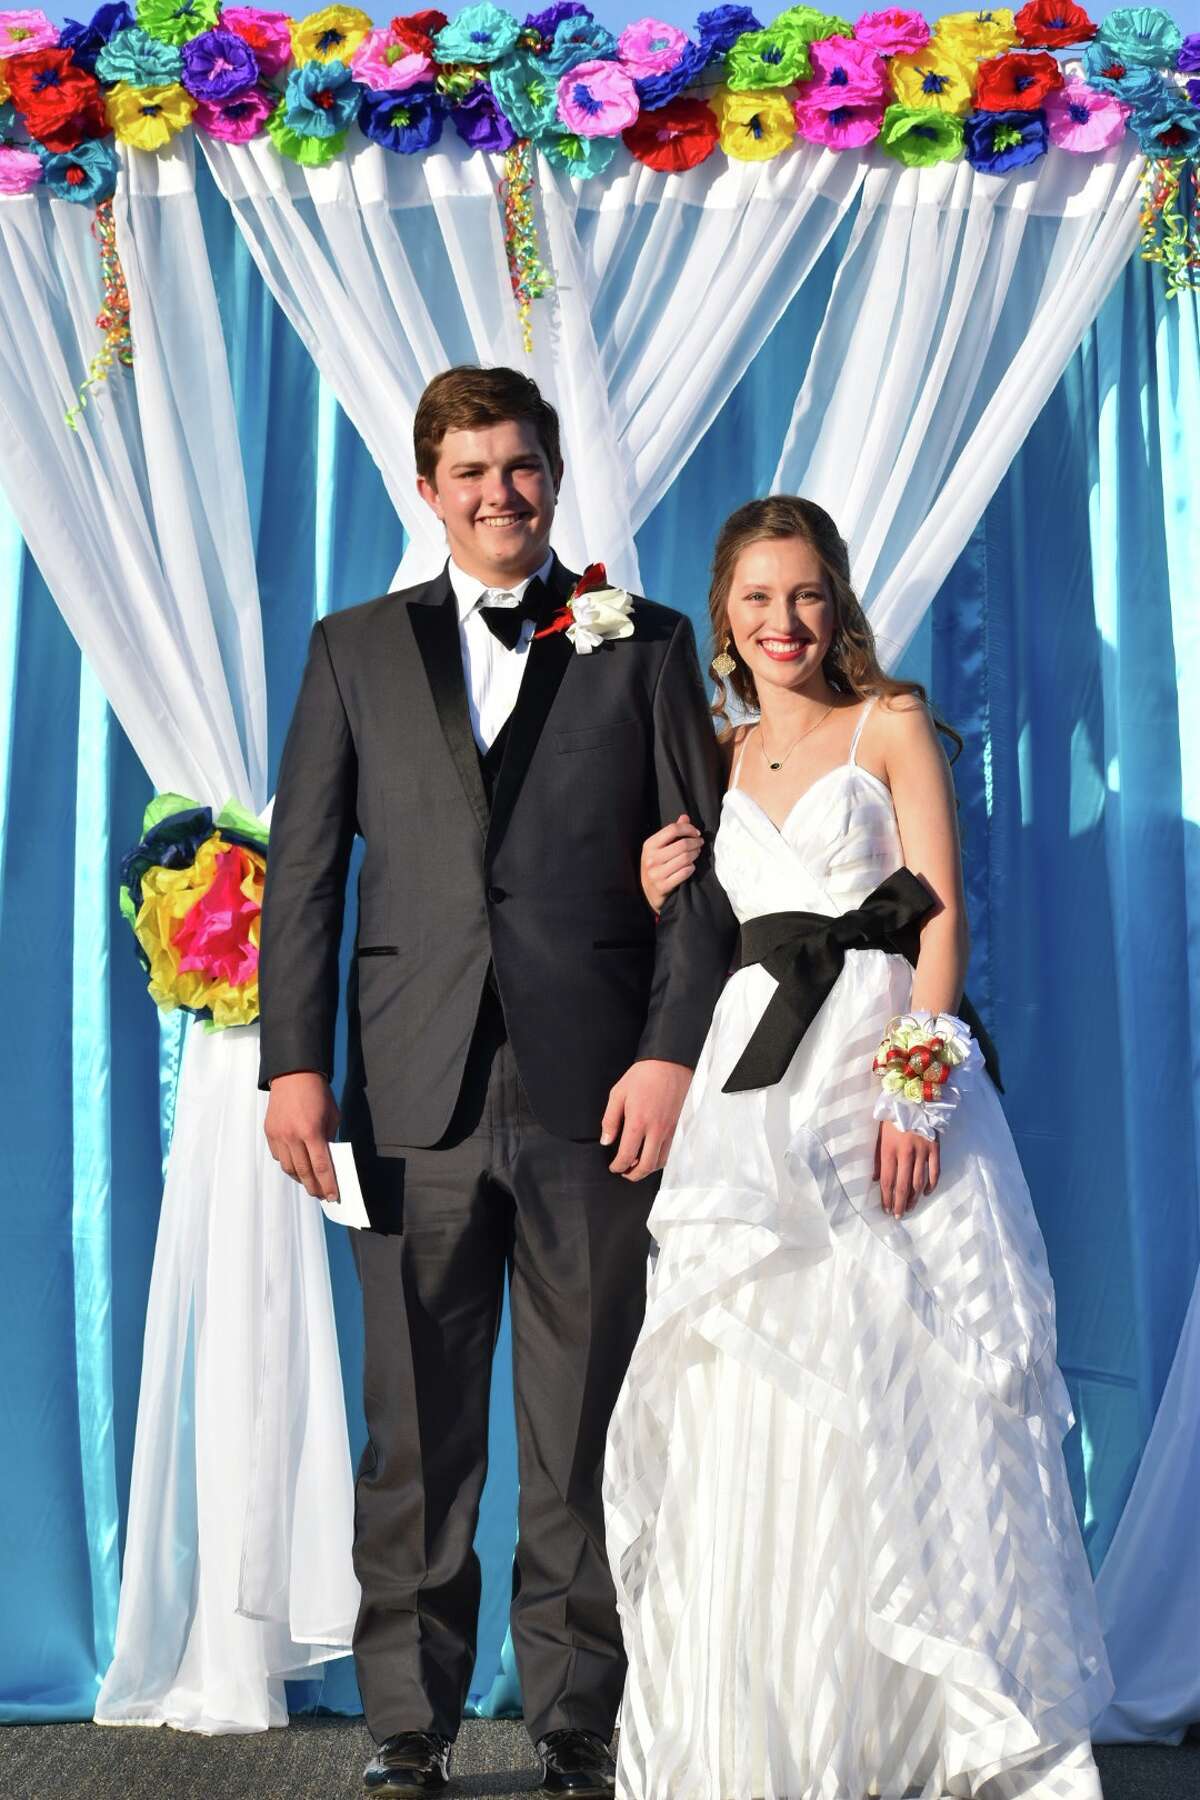 The Plainview High School prom was held Saturday, May 5 at the high school.